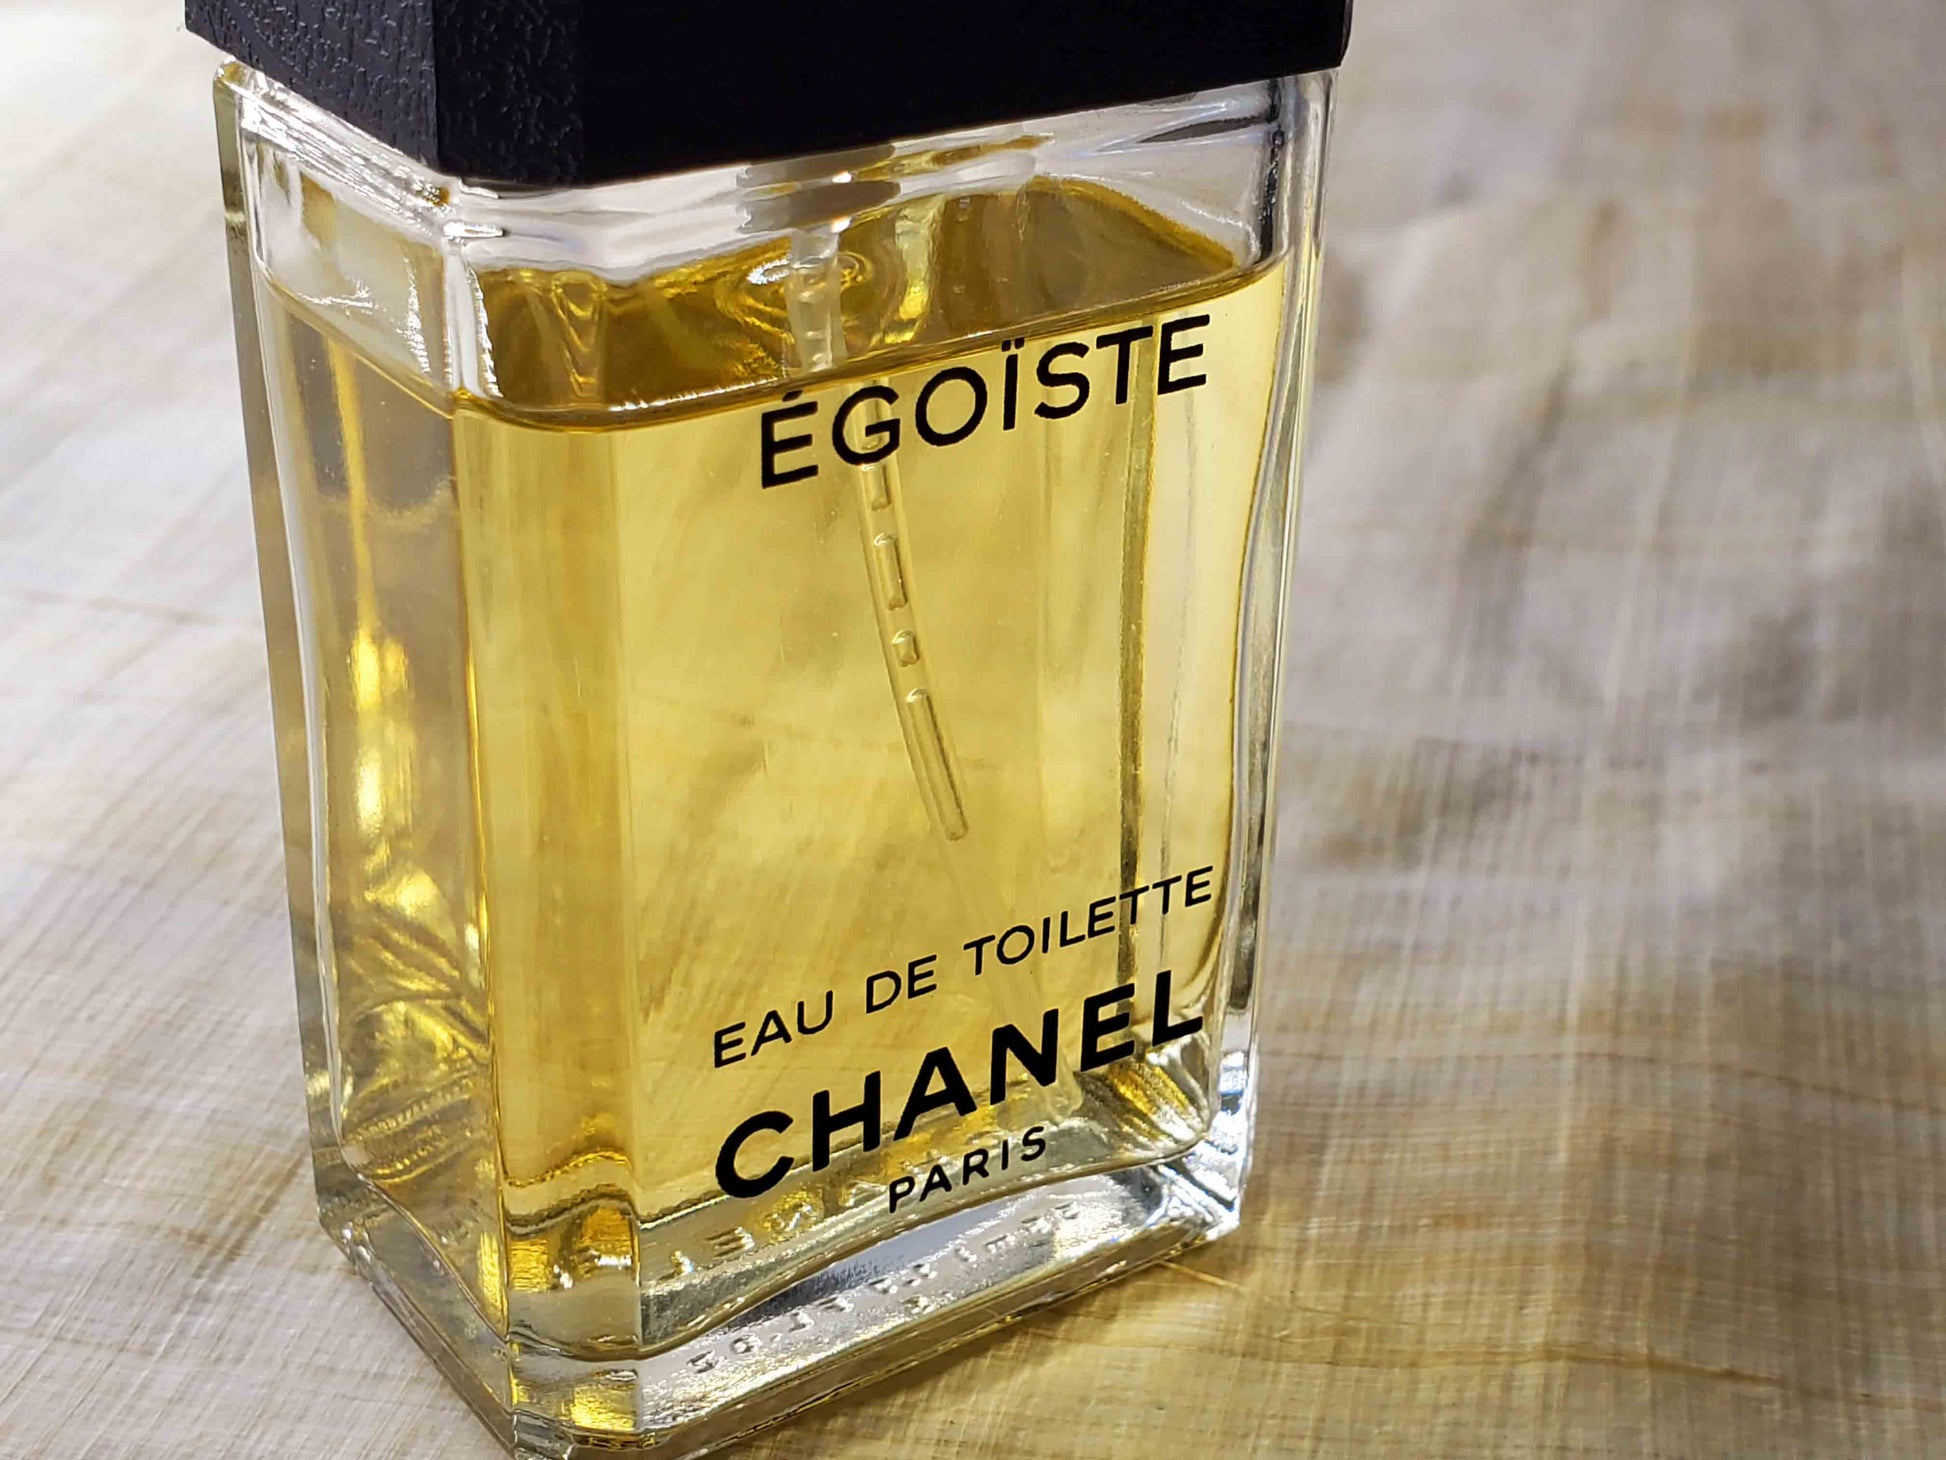 The single most awesome fragrance for men ever invented, Chanel - Egoiste  but at $87.00 a bottle, it's in the luxury ca…